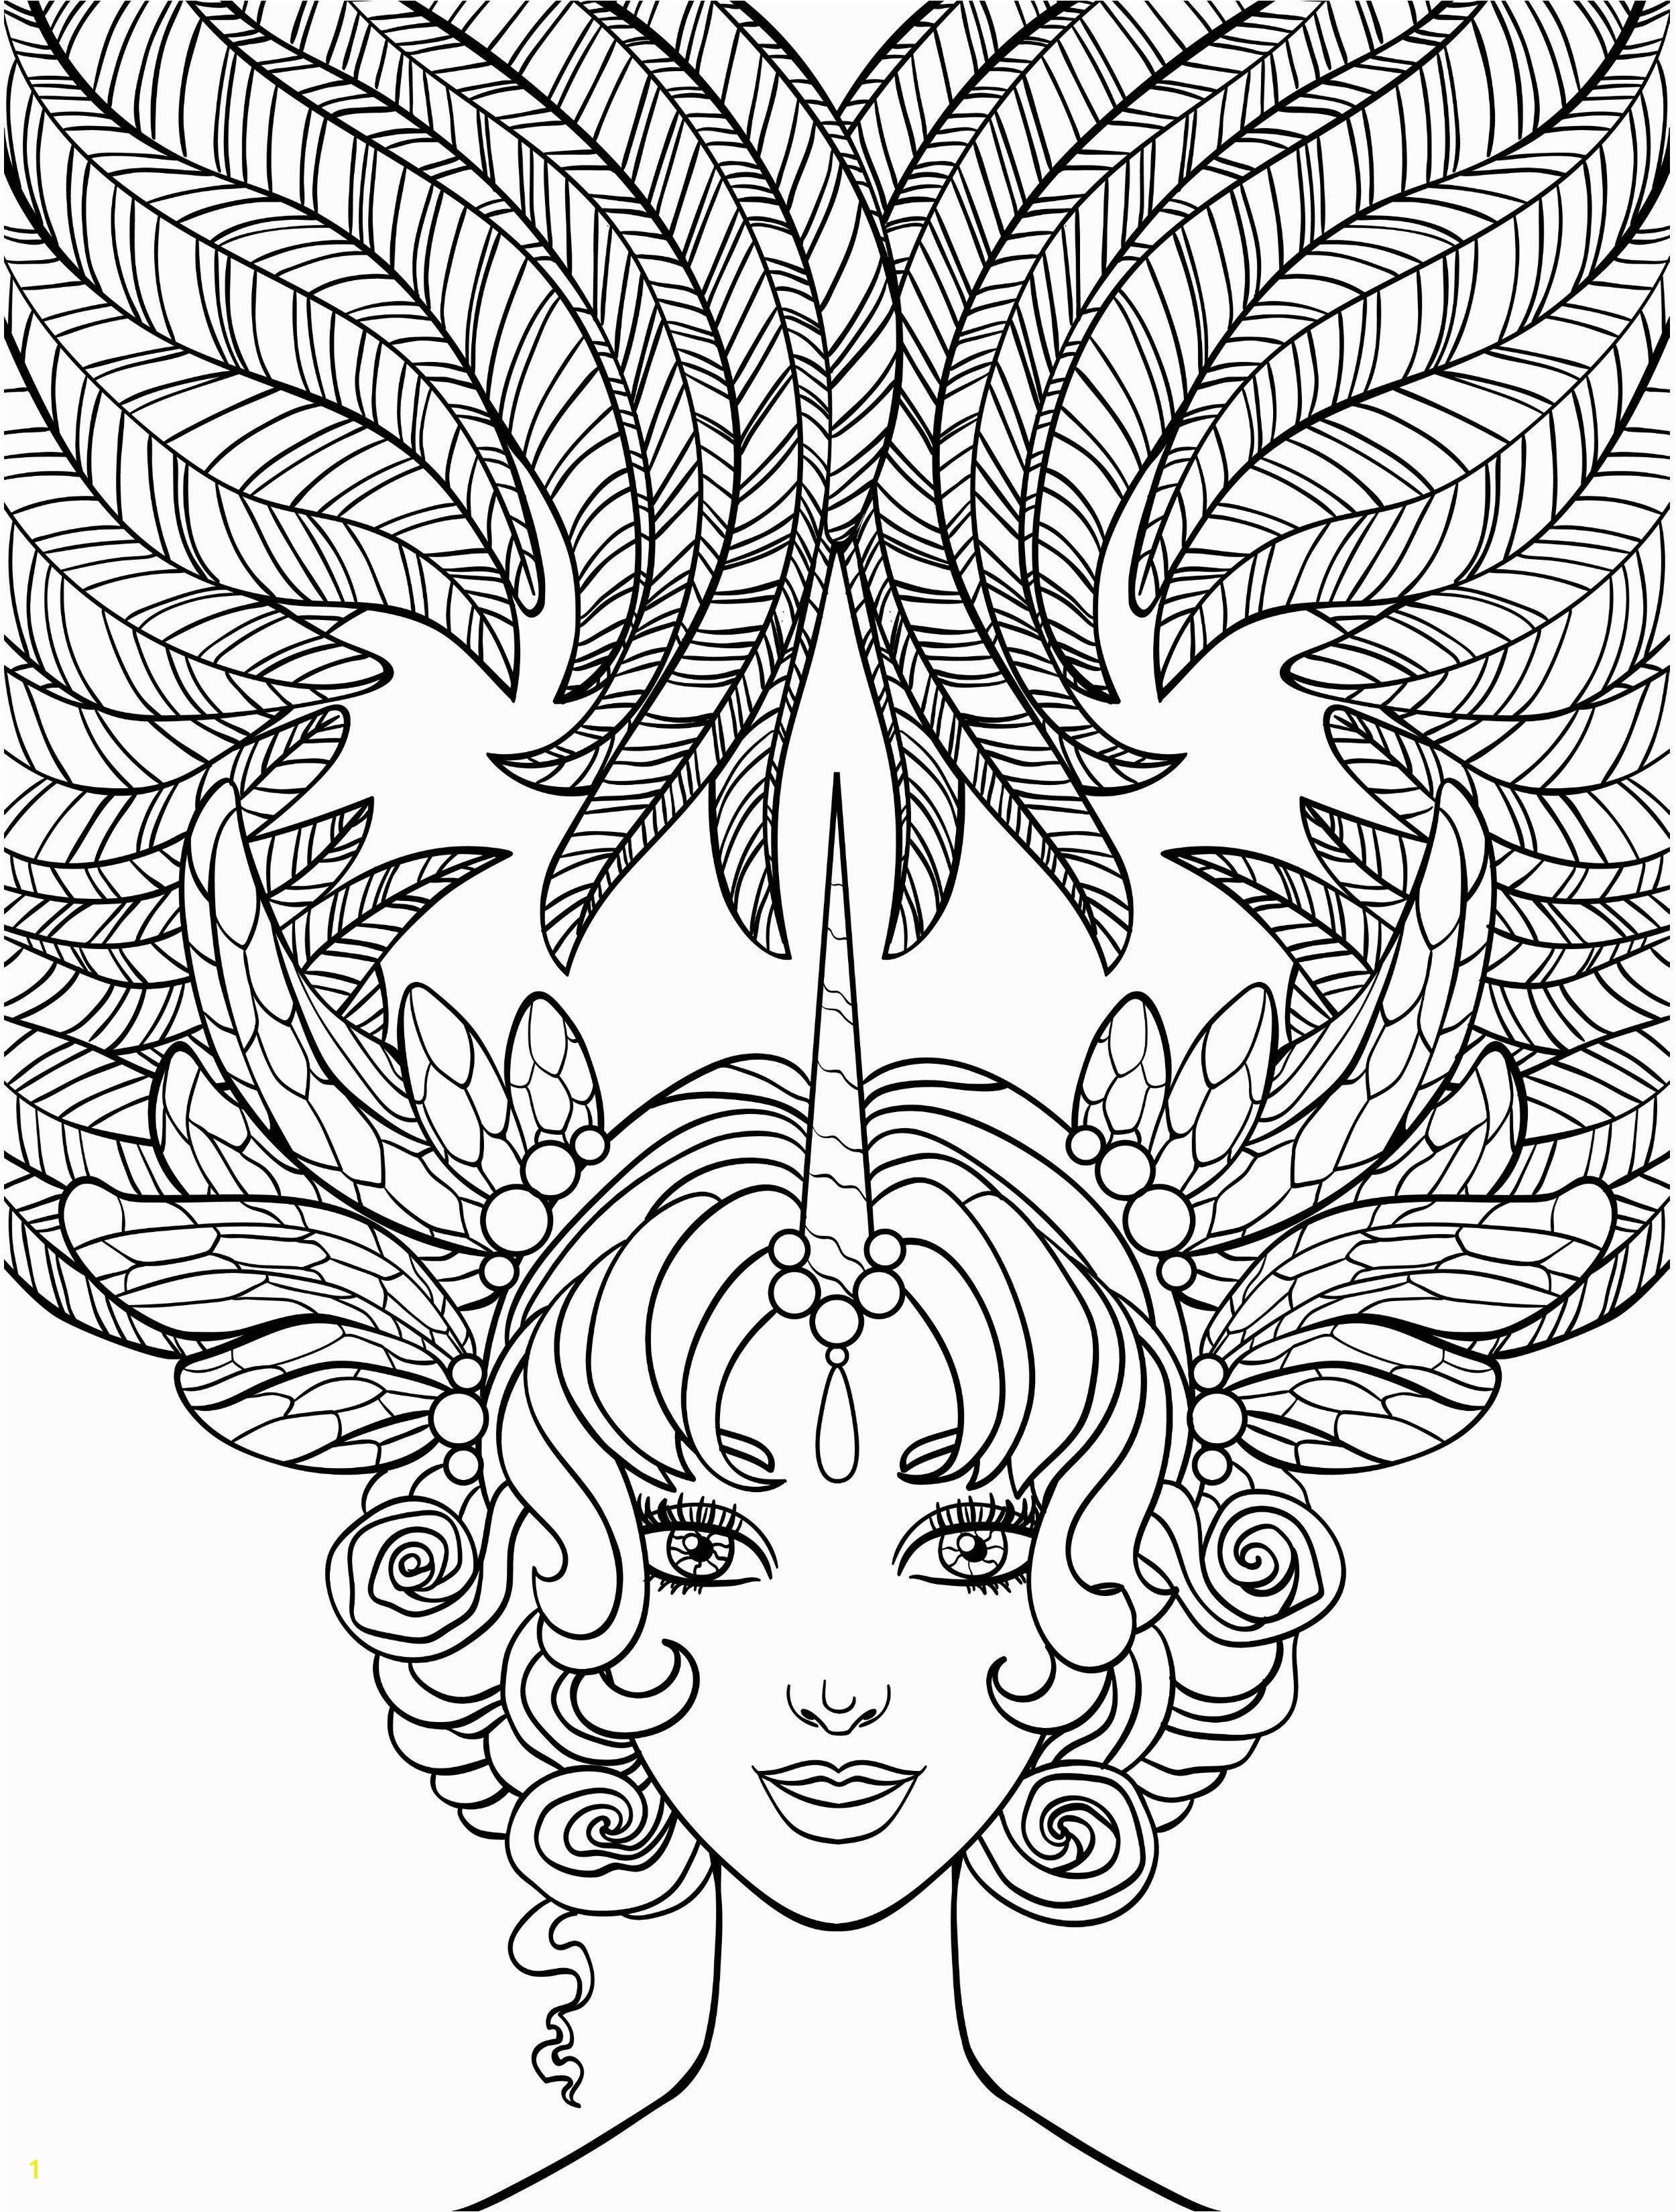 10 Crazy Hair Adult Coloring Pages